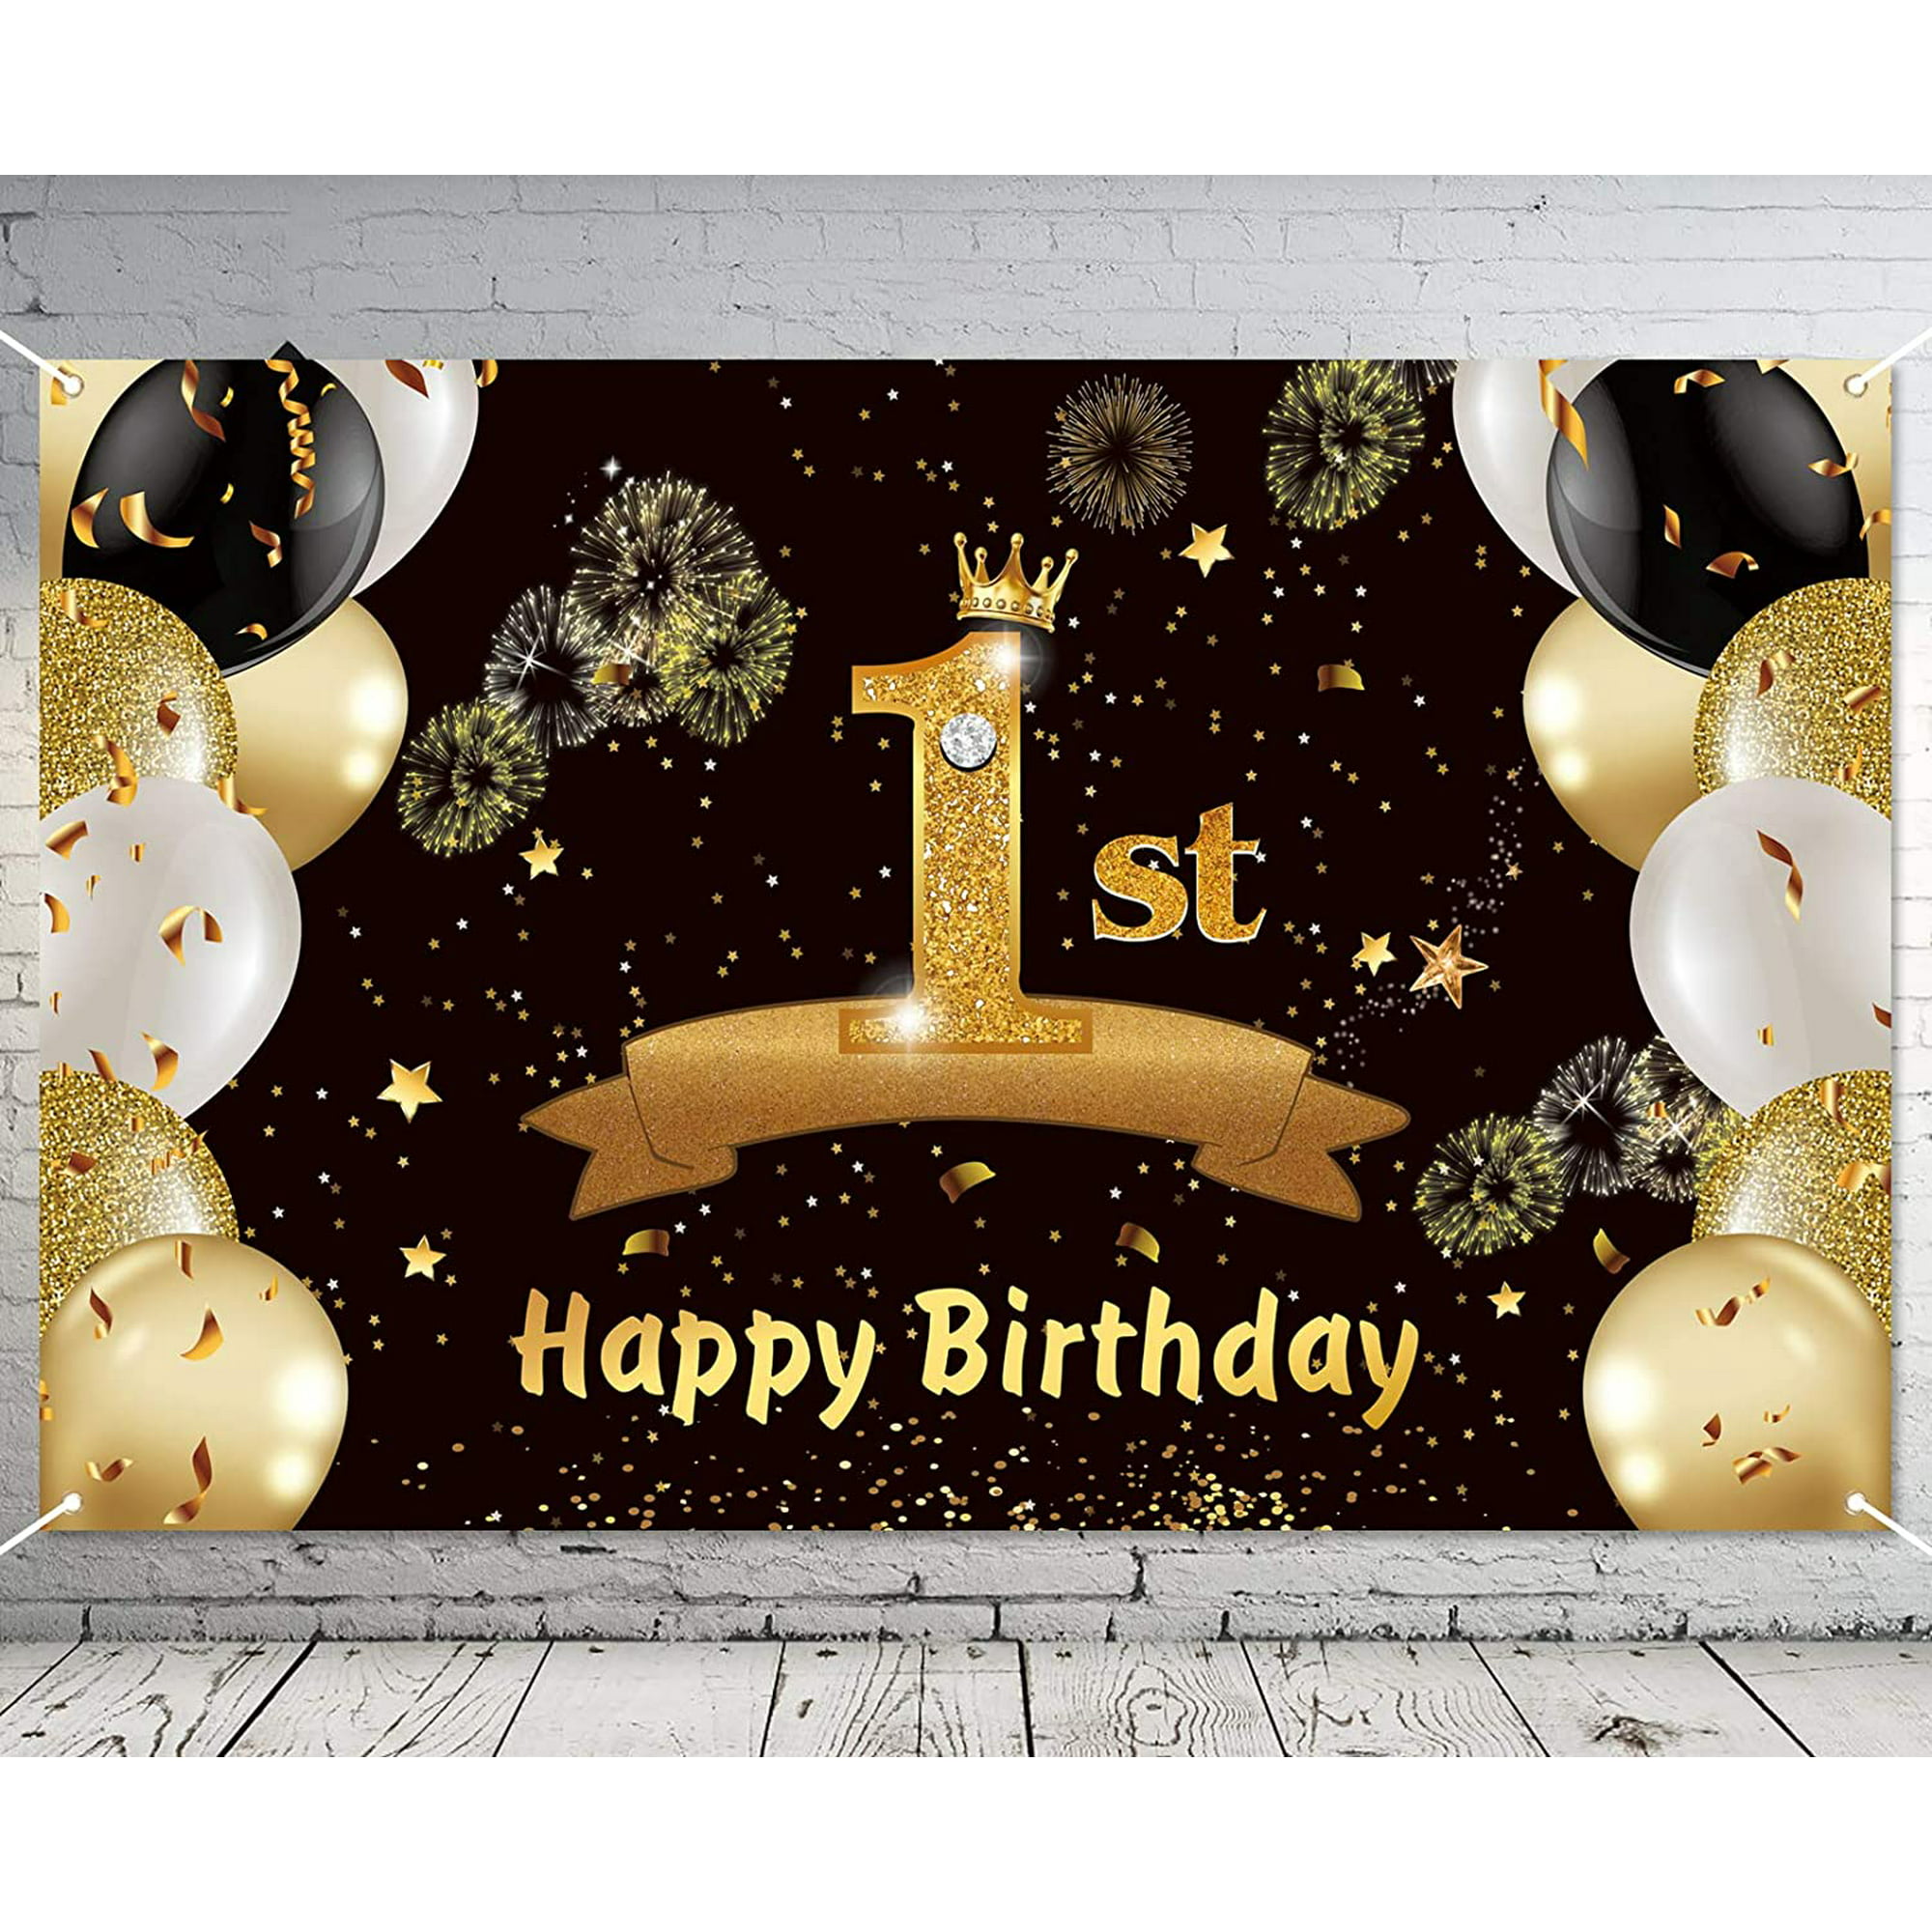 Dedang Ouddy 1st Birthday Decoration for Boys Girls Happy Birthday Banner -  4 x 6 Ft Gold and Black Photography Backdrop for First Birthday Party  Decorations Background Supplies | Walmart Canada